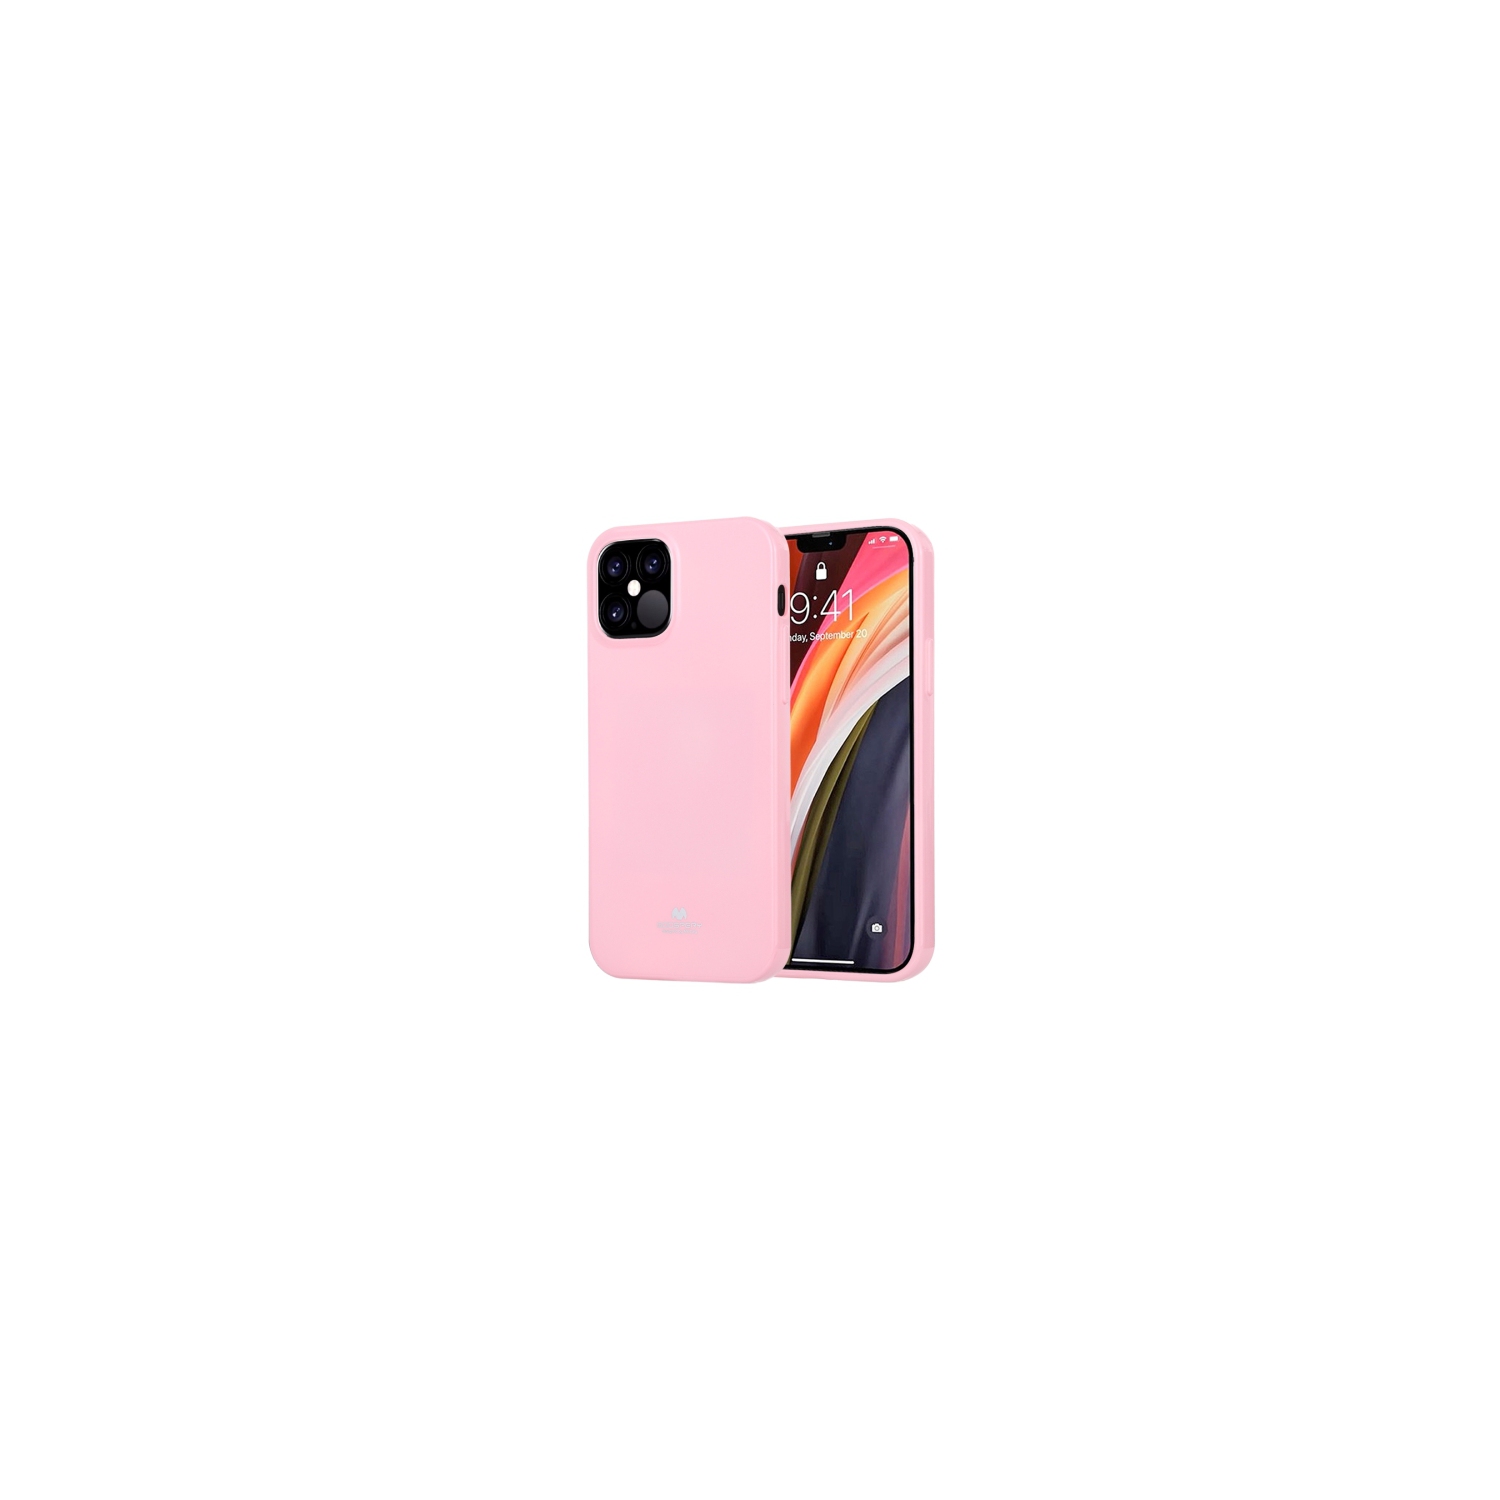 TopSave Iphone 12 Mini Goospery Jelly TPU Case, Baby Pink